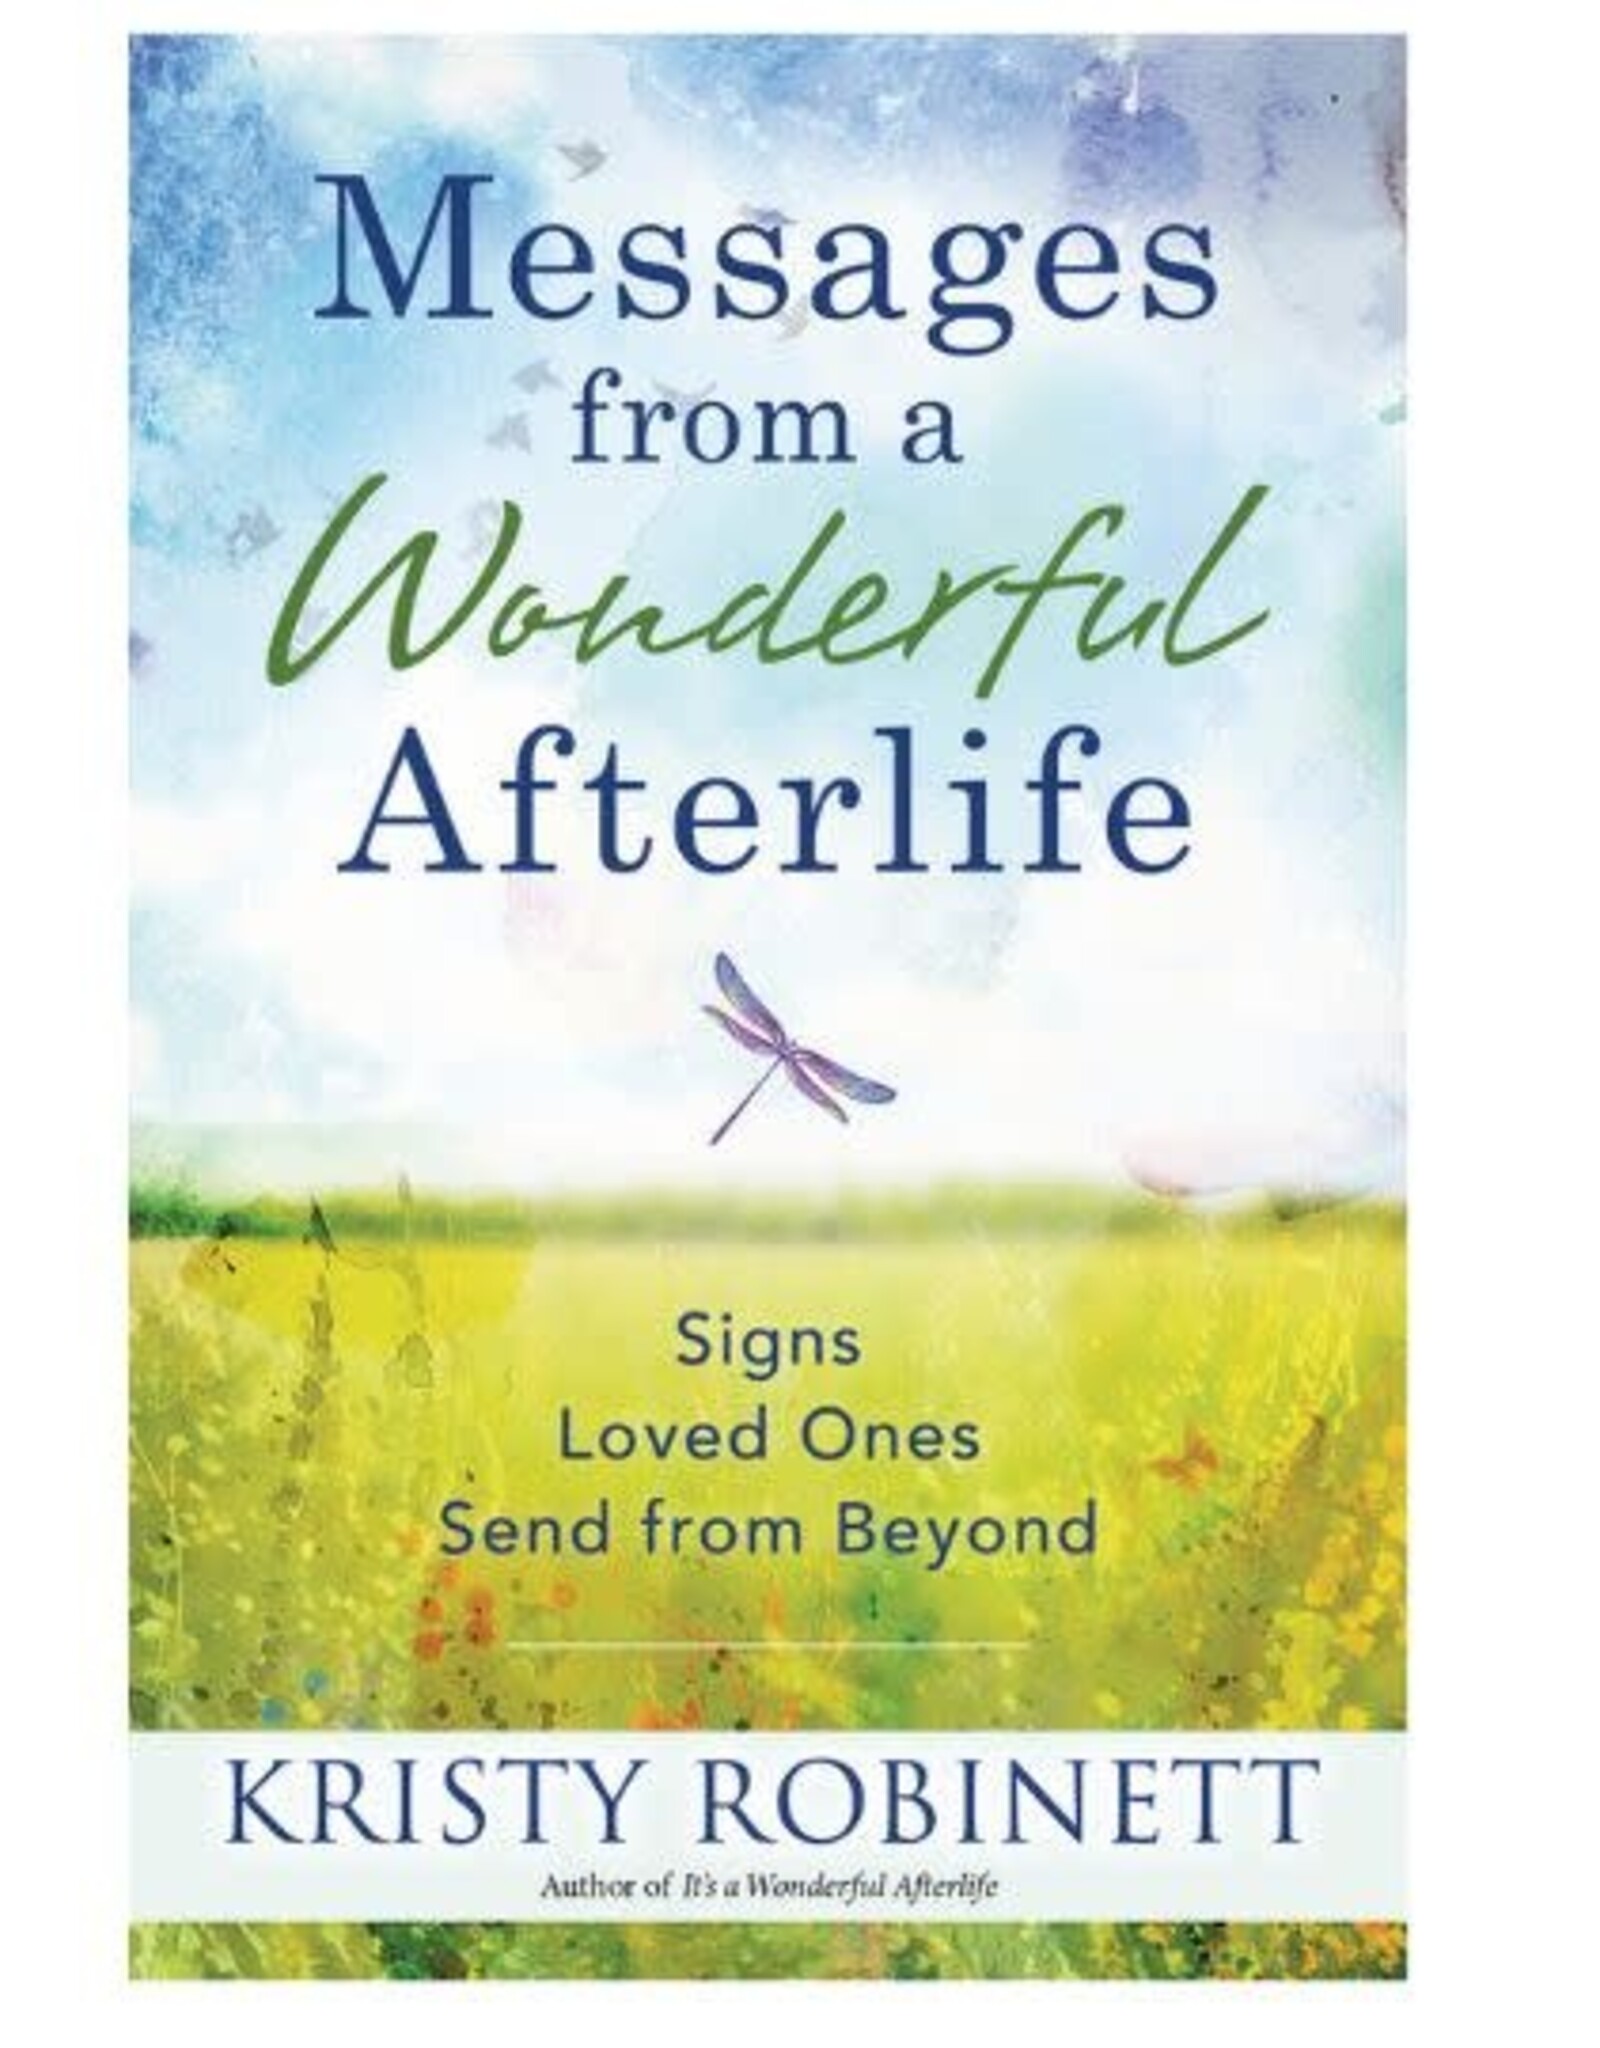 Messages from a Wonderful Afterlife by Kristy Robinett